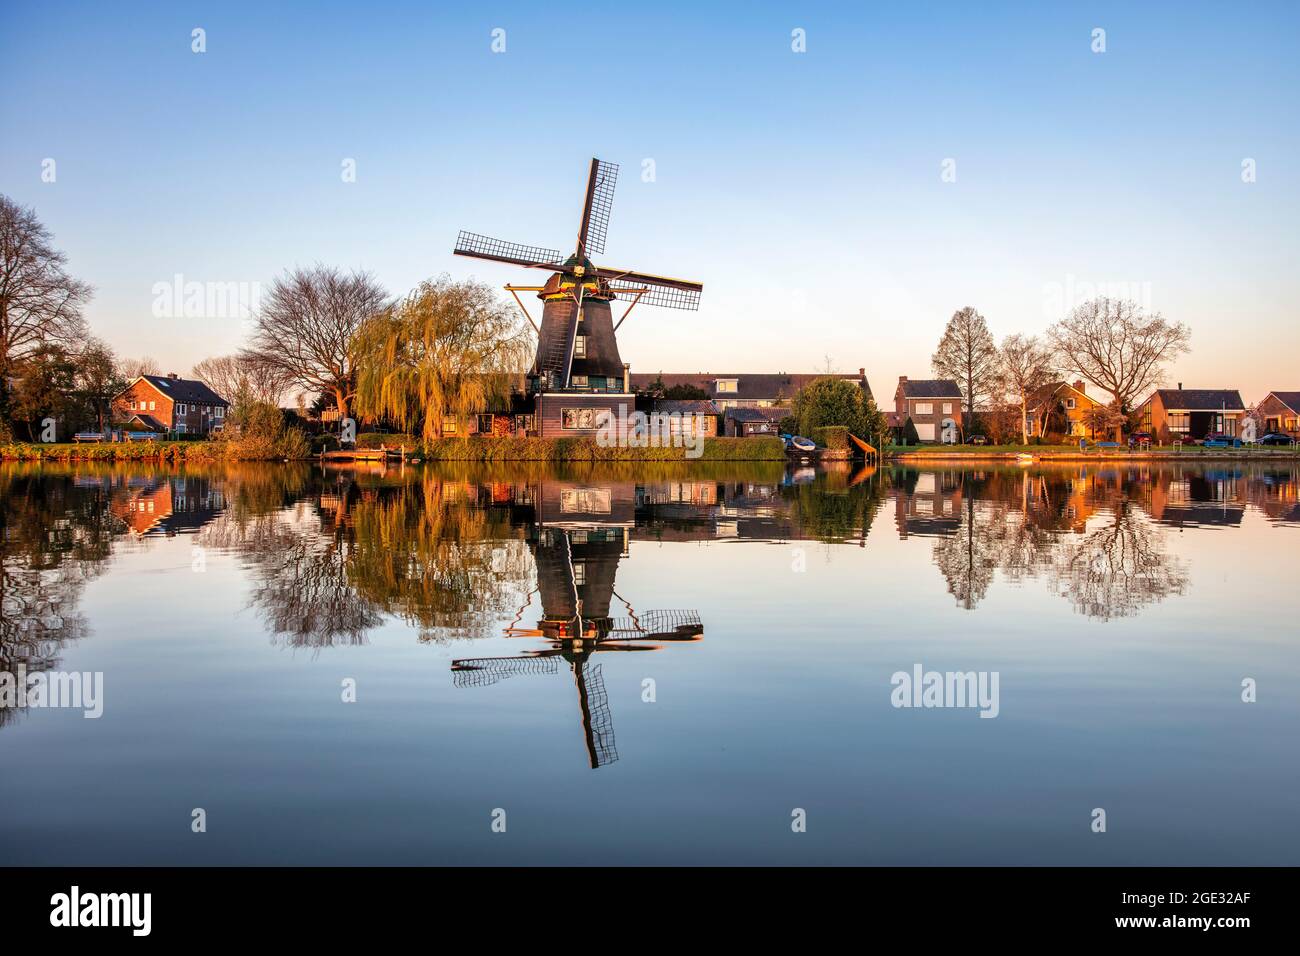 The Netherlands, Weesp, Vecht river. Windmill for grinding flour. Stock Photo